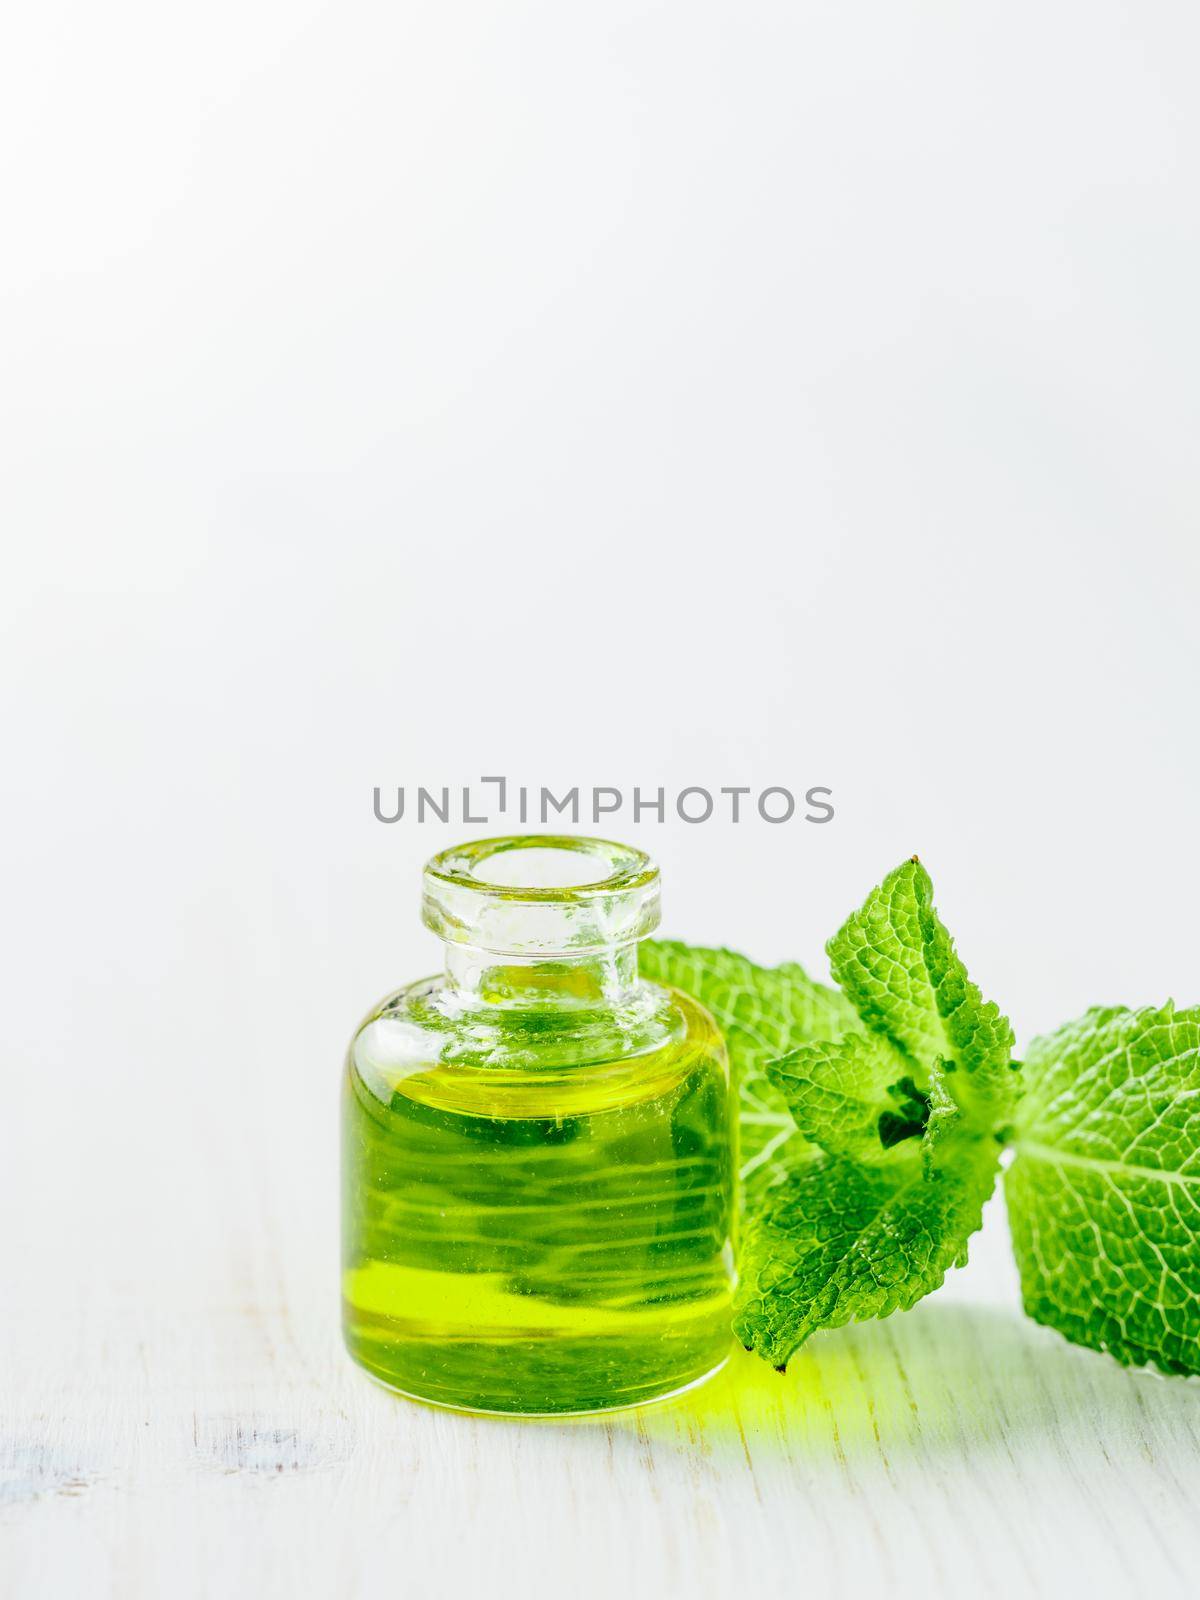 Organic essential mint oil or melissa oil with green leaves of mint. Mint melissa oil on white tabletop with copy space. Vertical